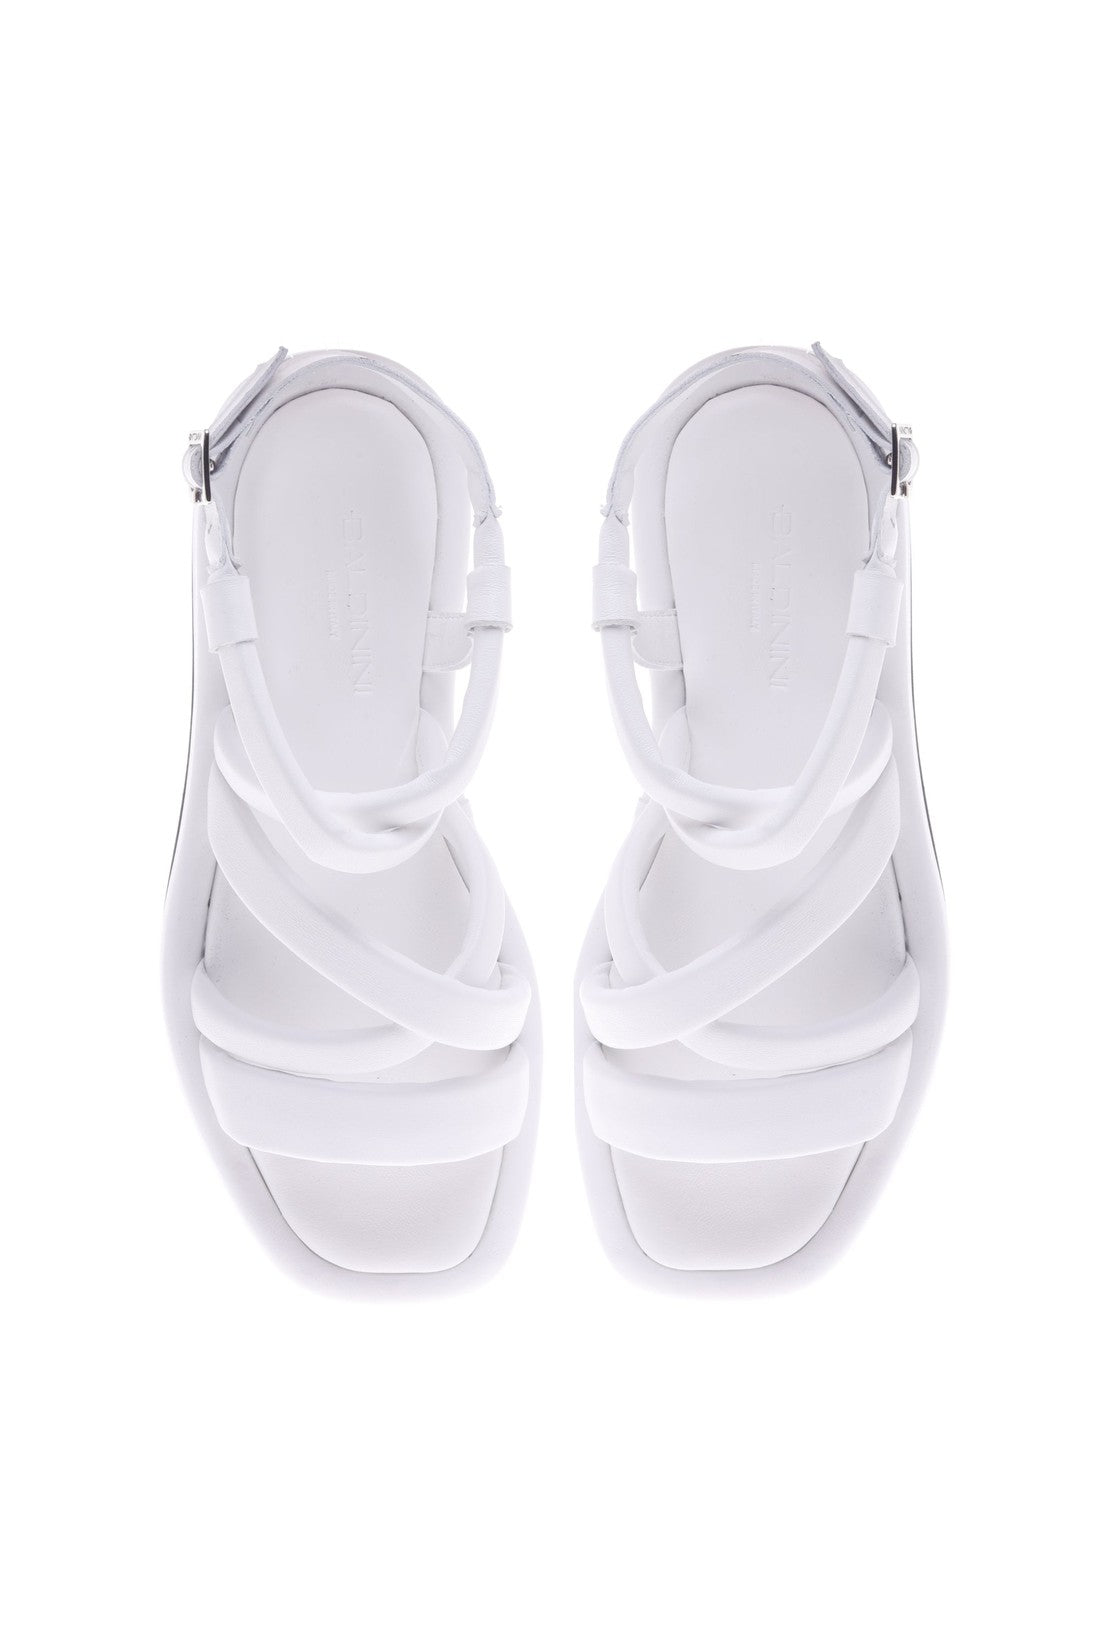 BALDININI-OUTLET-SALE-Sandal-in-white-nappa-leather-Sandalen-ARCHIVE-COLLECTION-2.jpg